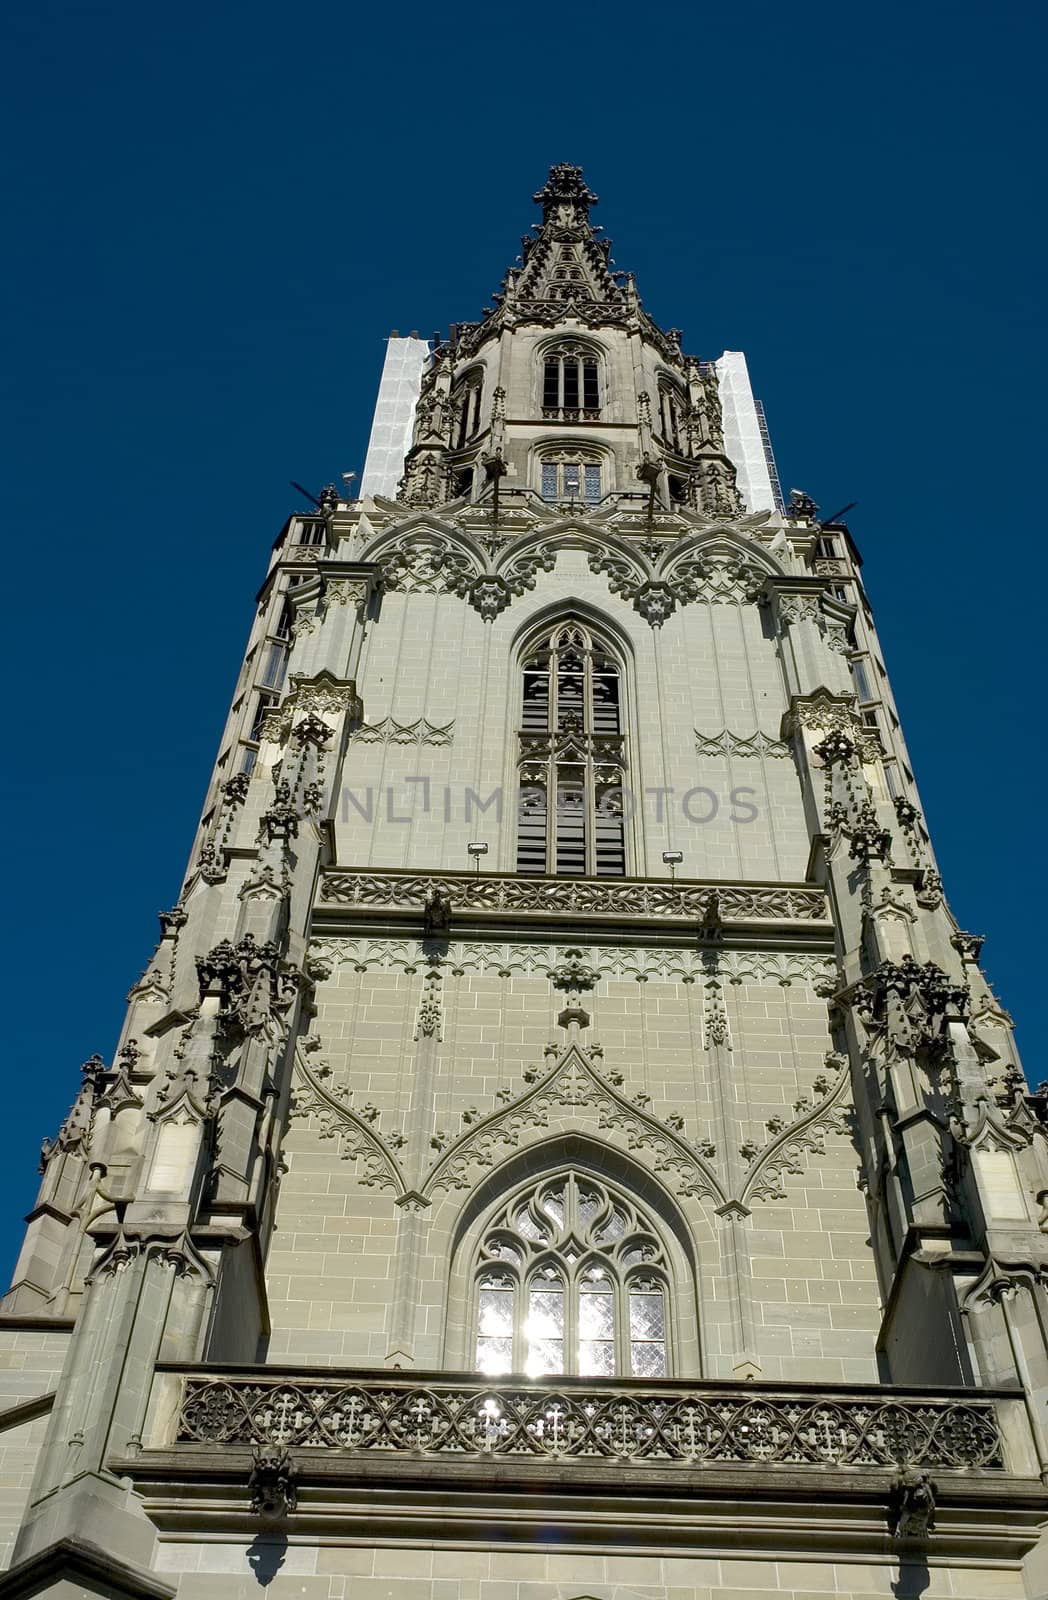 One of the largest churches in Switzerland.